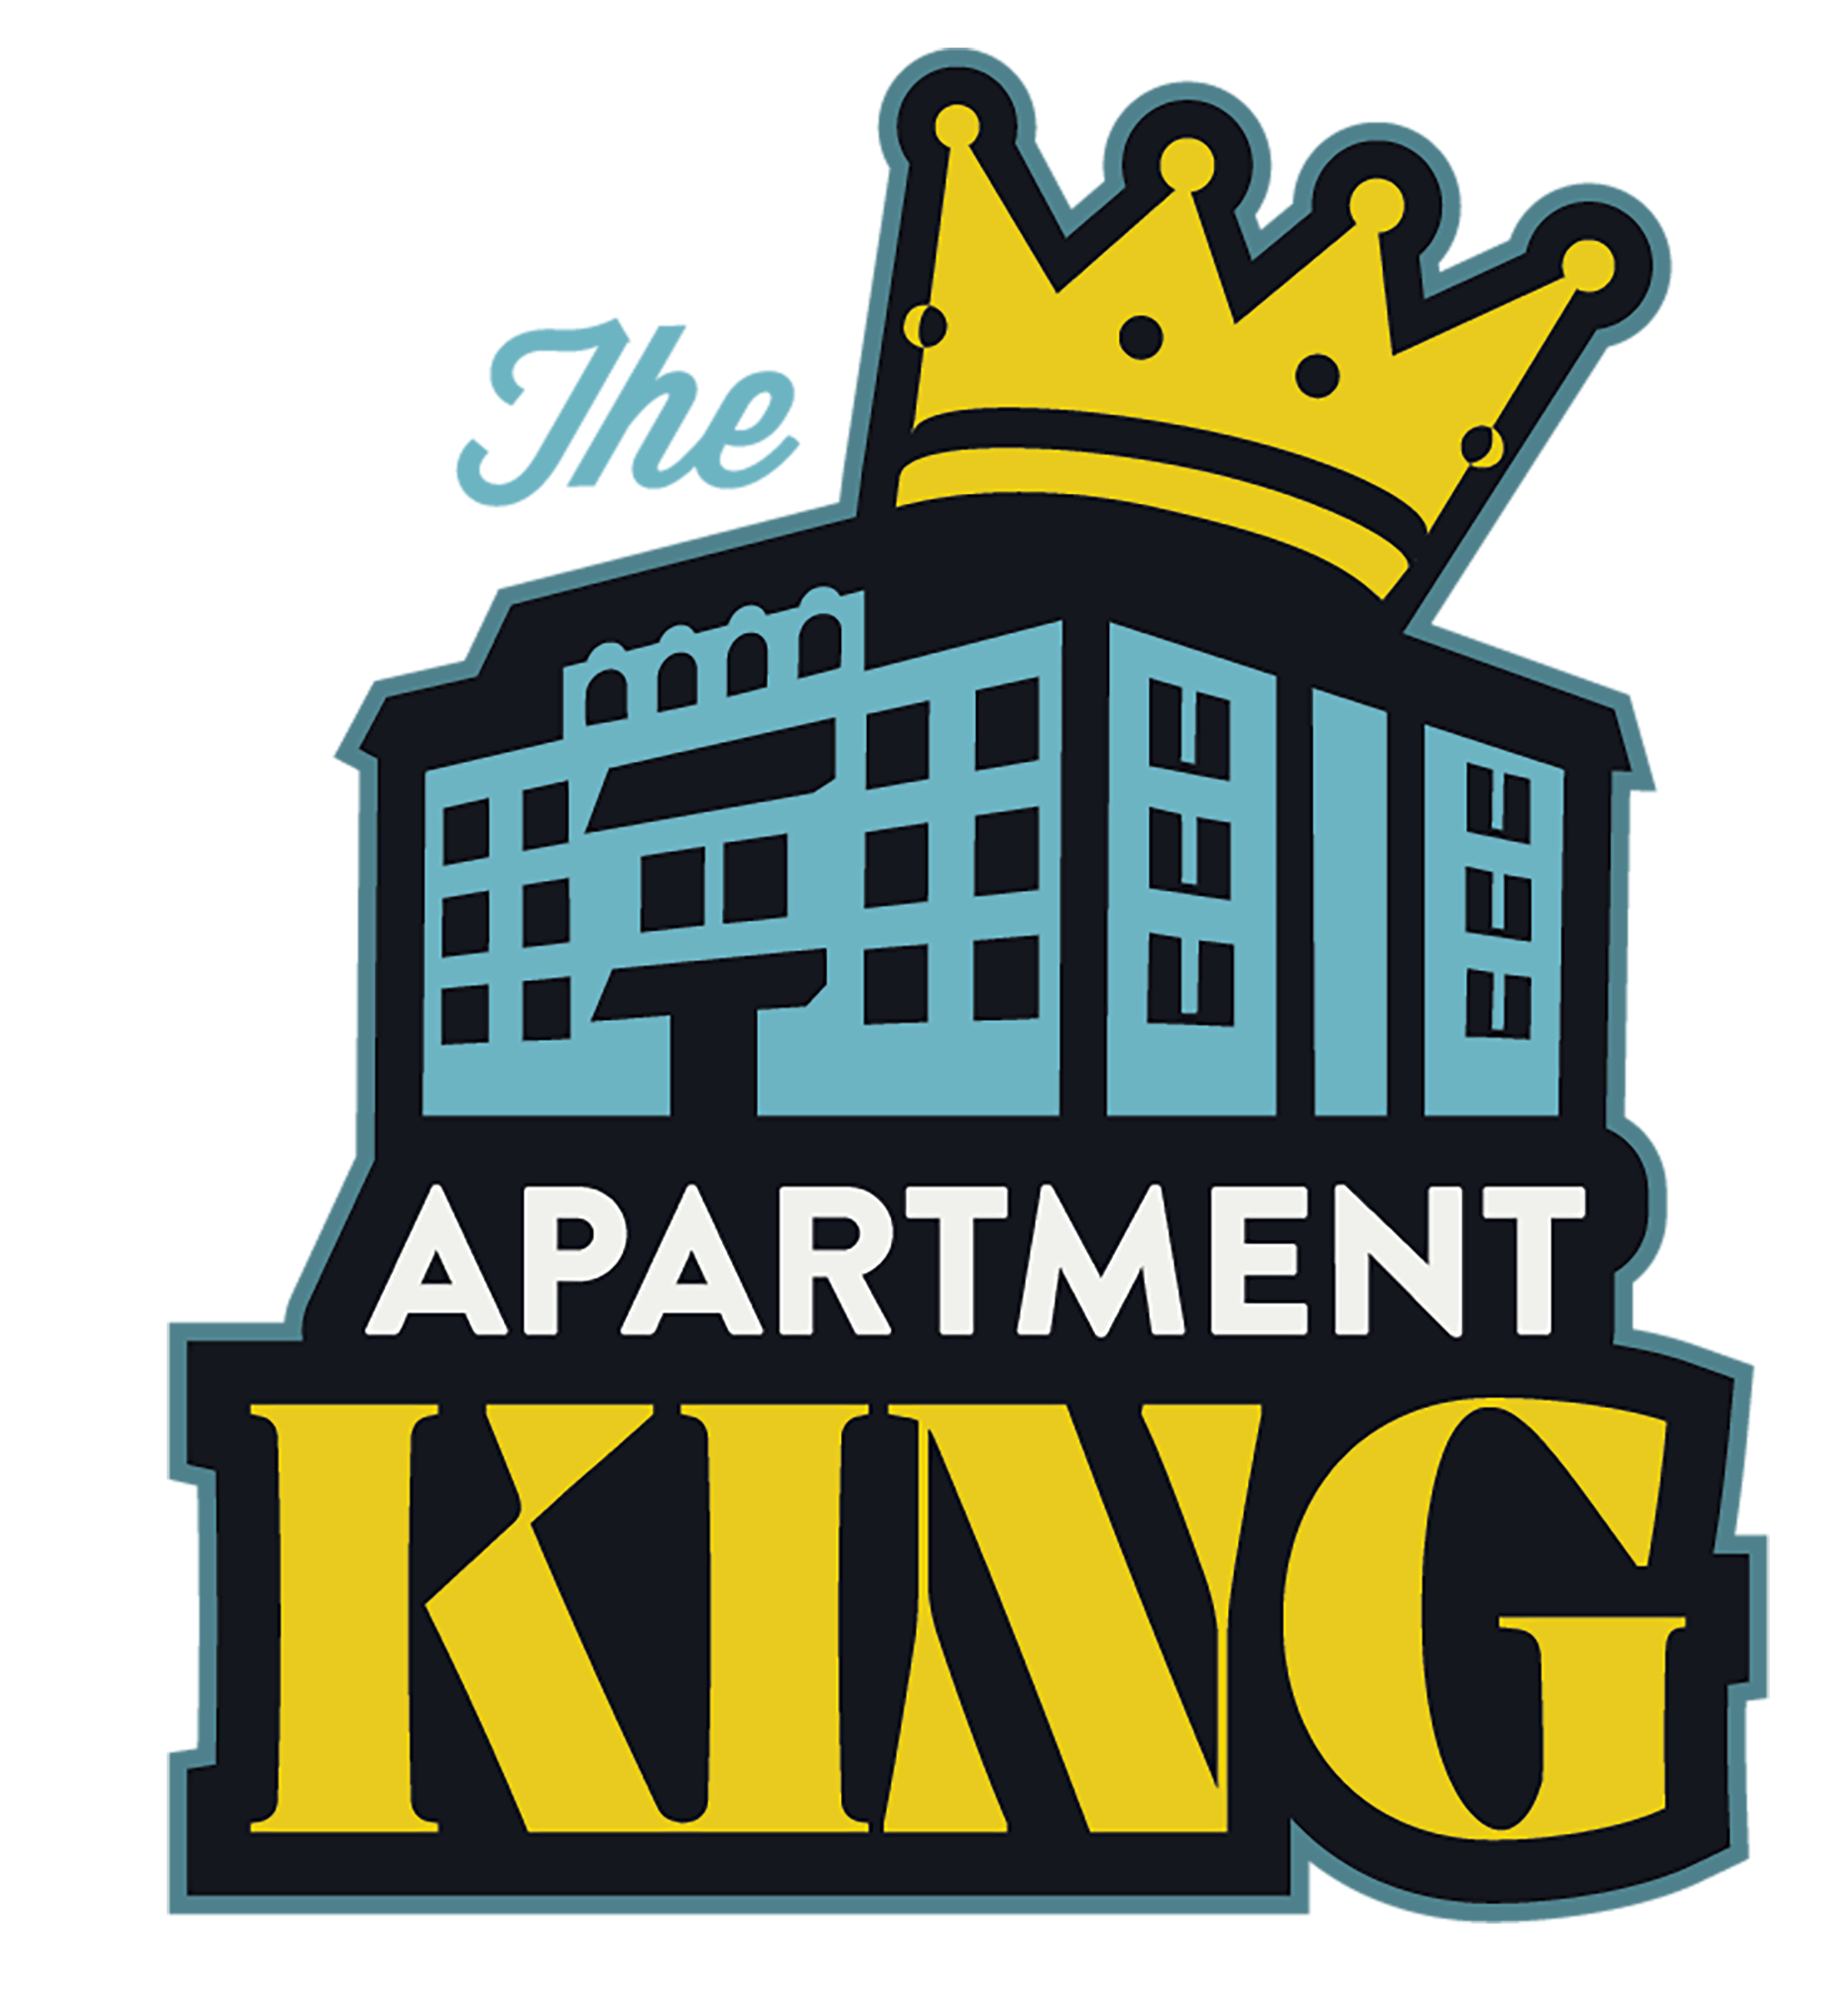 The Apartment King